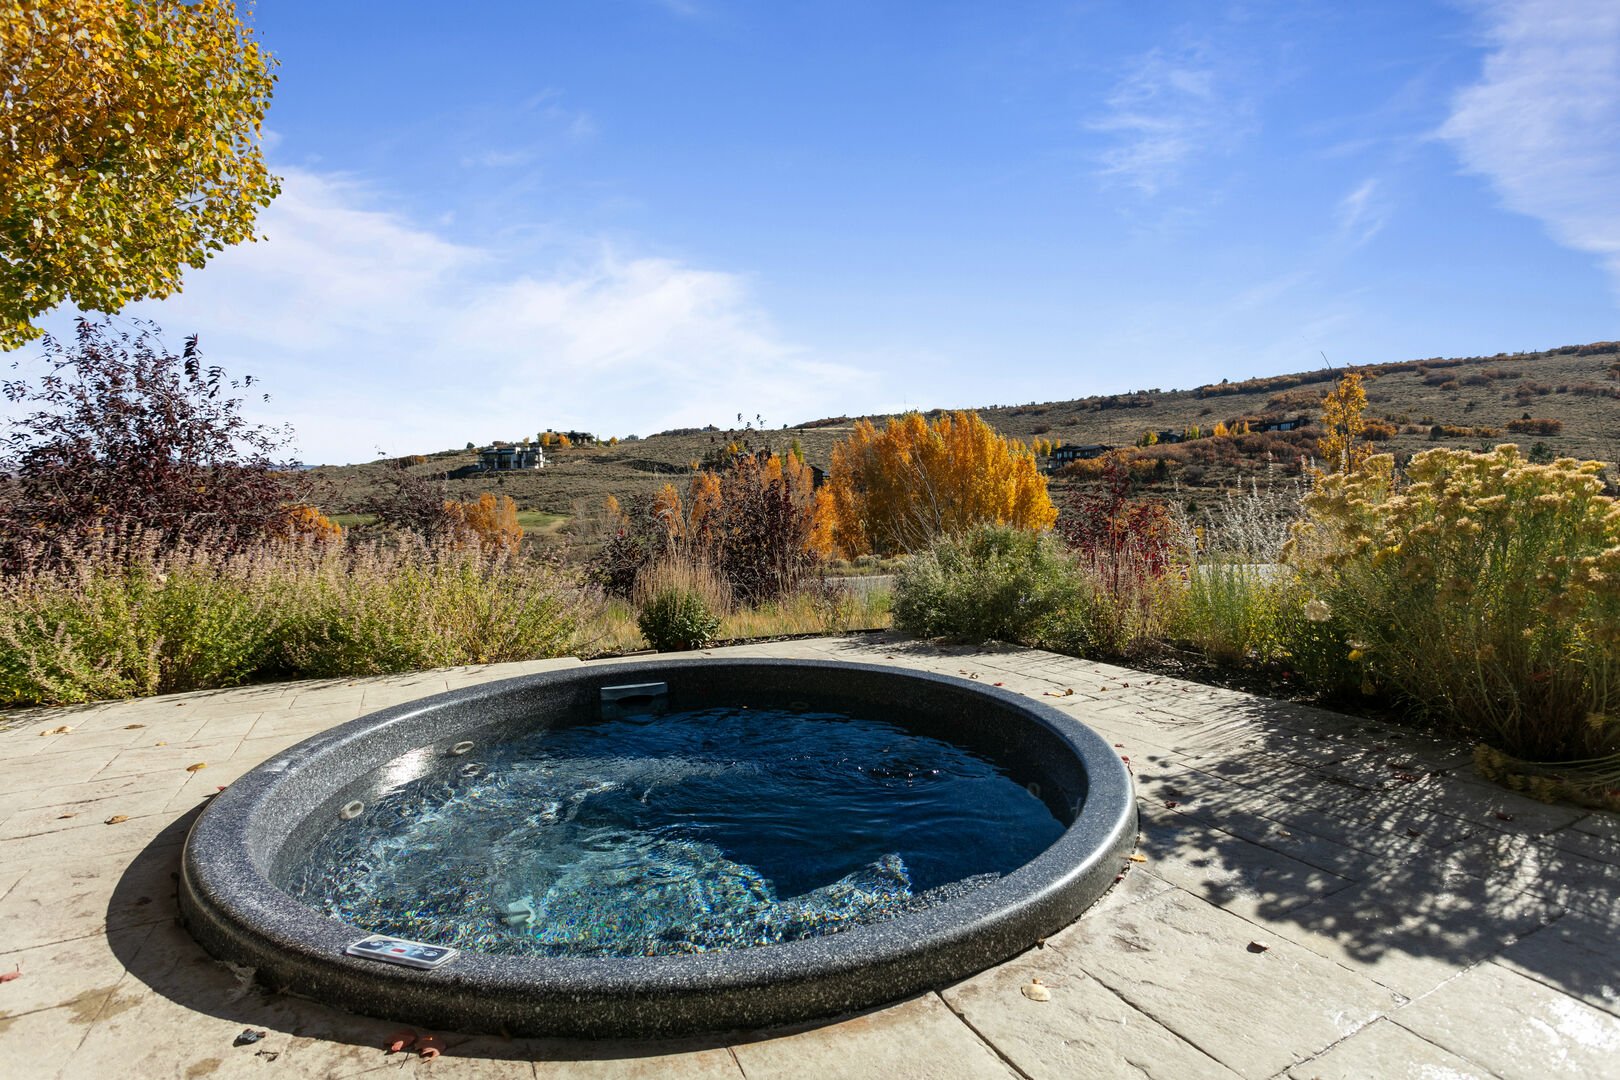 Private hot tub with sweeping views.